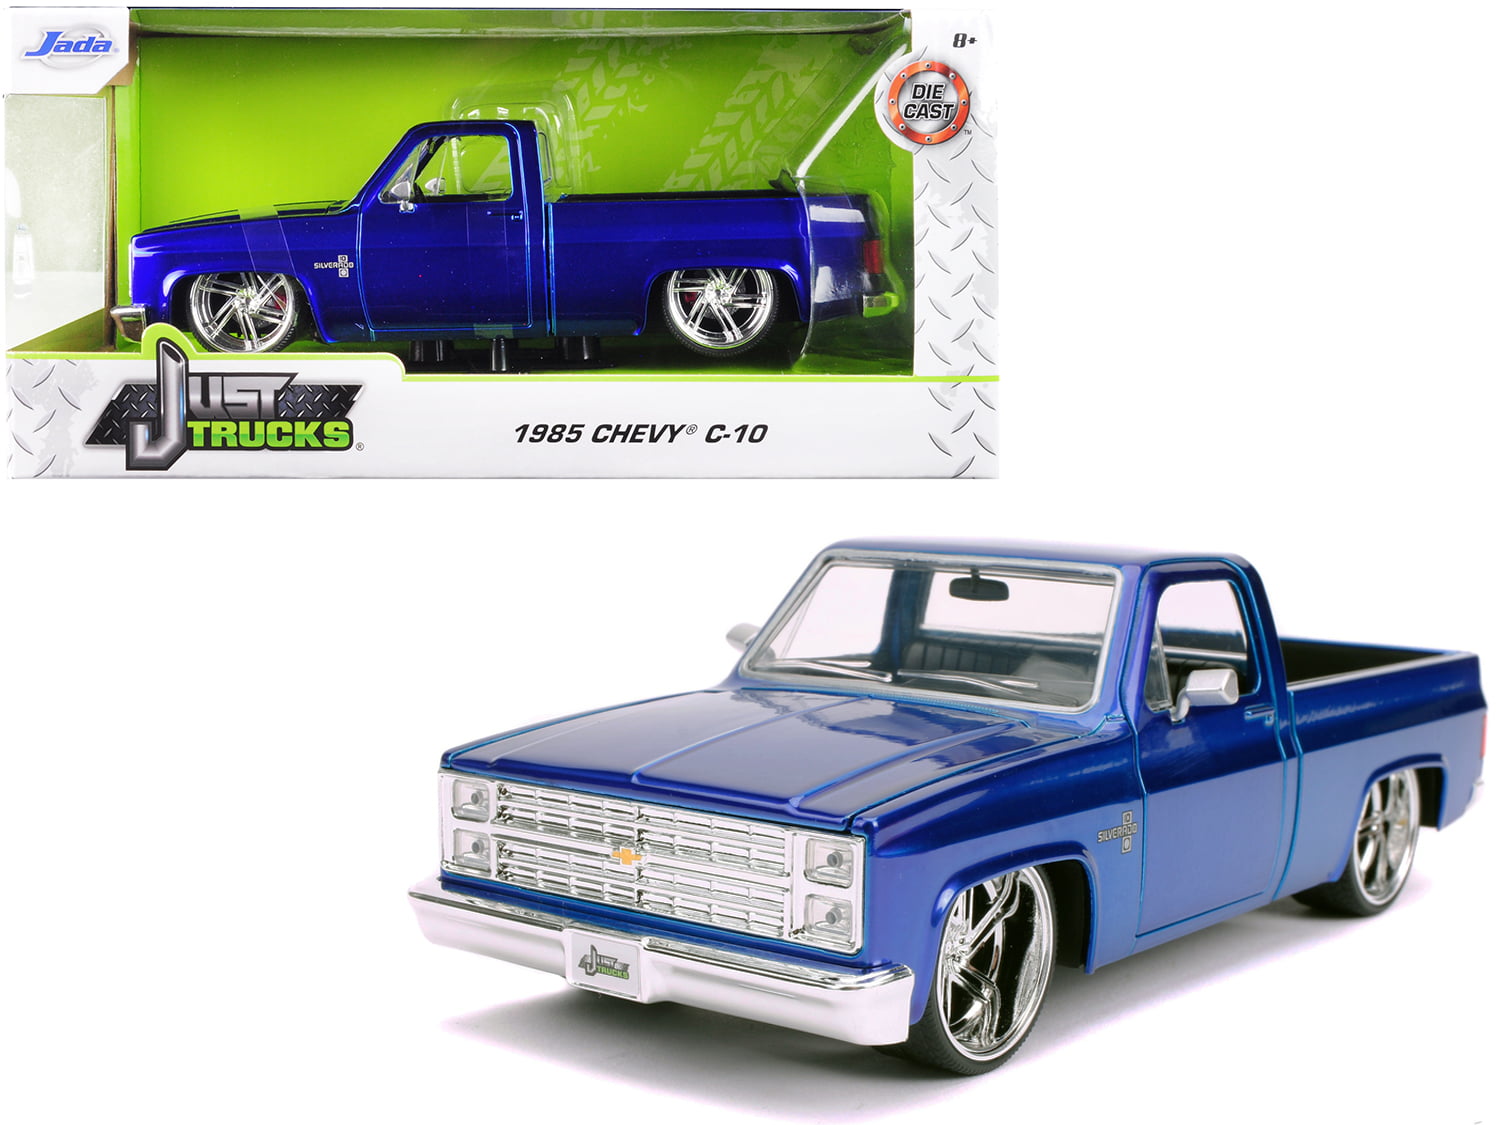 1/64 DIECAST CHEVROLET C-10 STEPSIDE PICKUP TRUCK SPEED WHEELS Details about   ROAD CHAMPS 